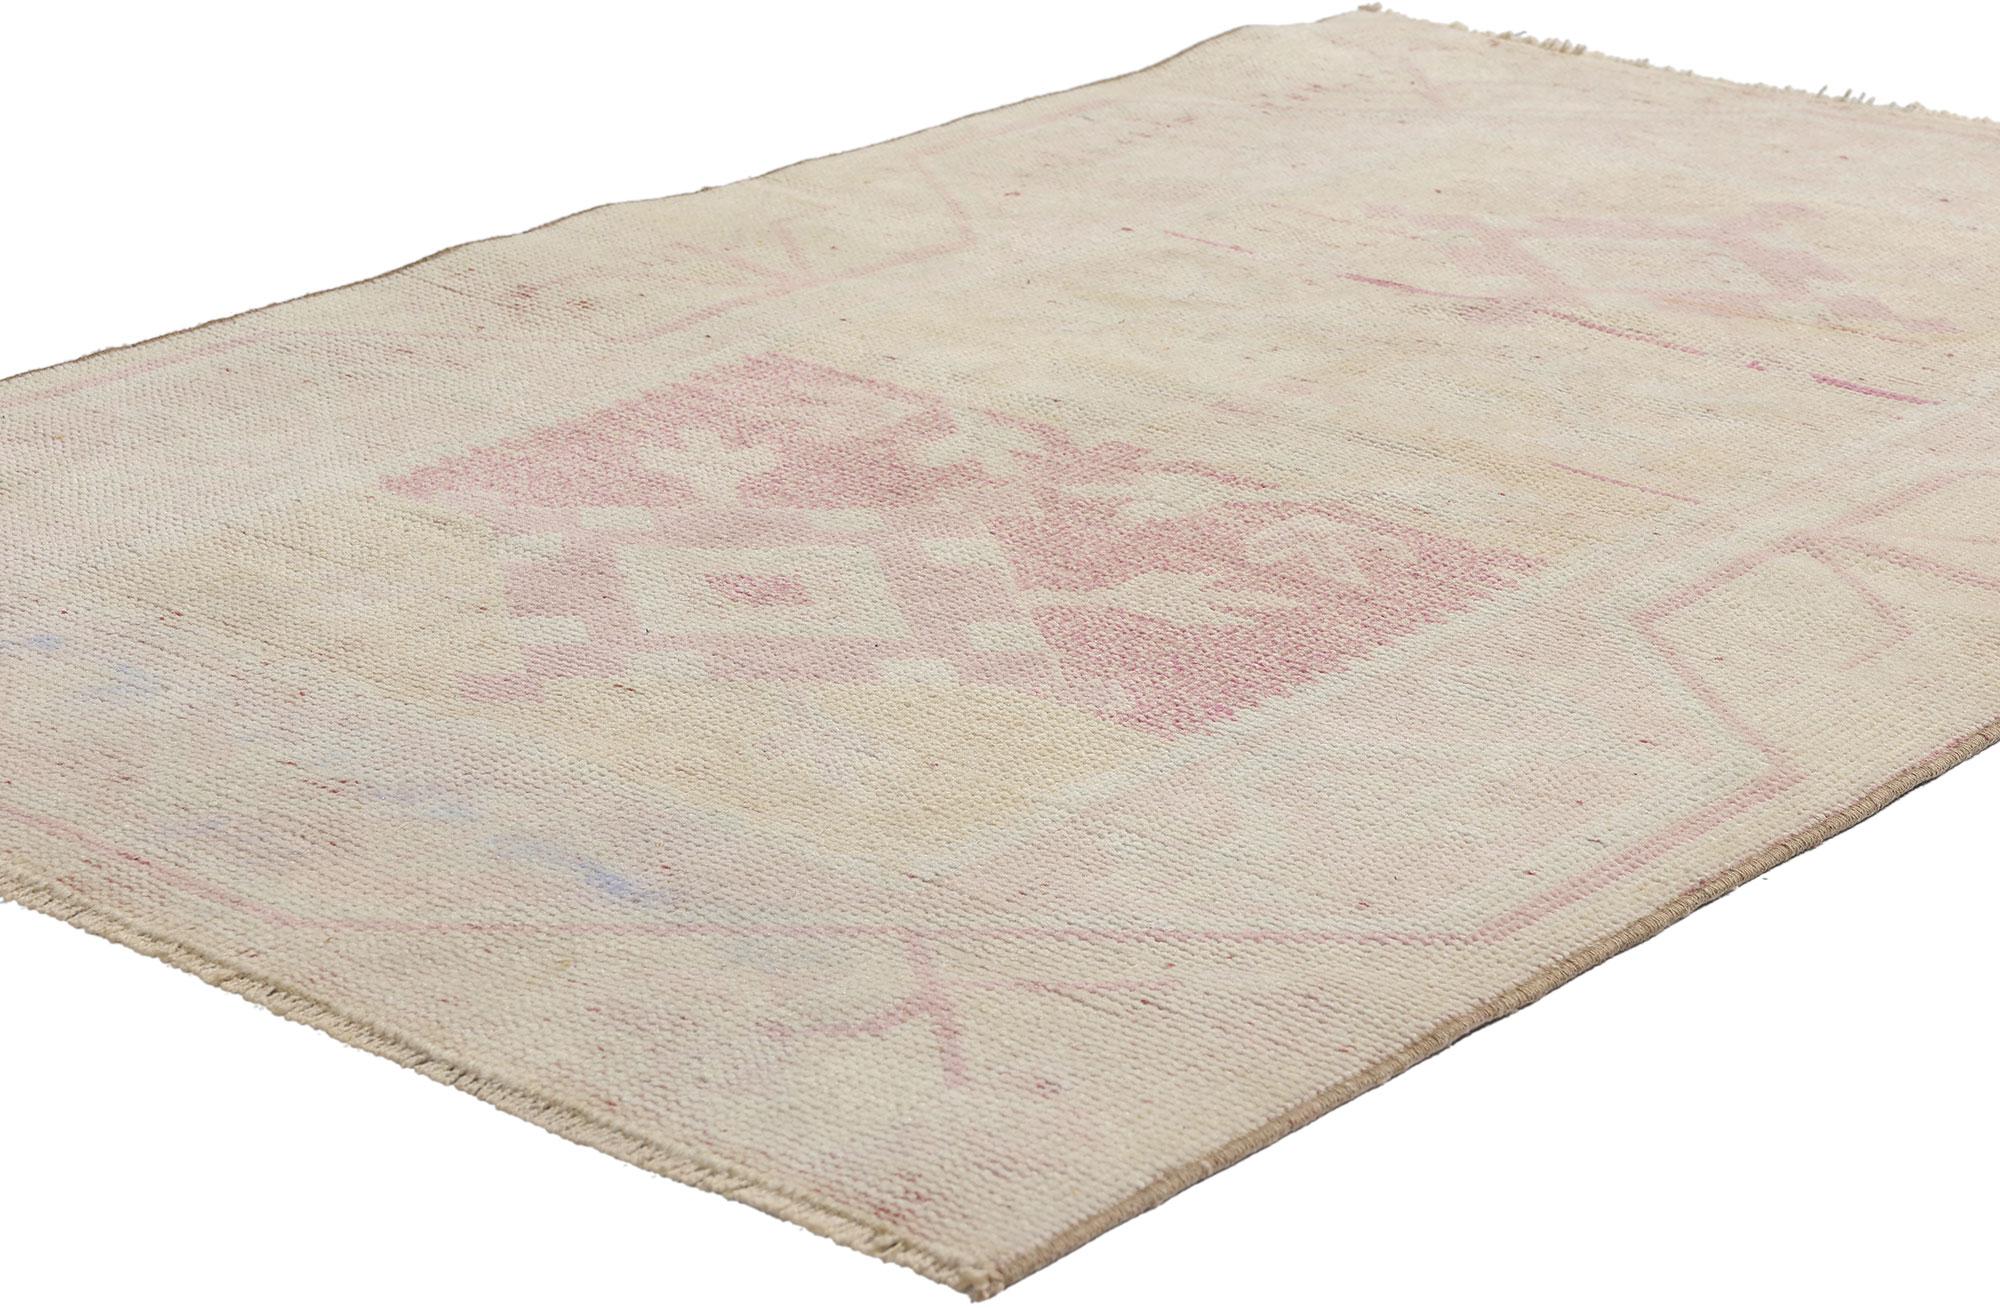 53932 Vintage Pastel Turkish Oushak Rug, 02'08 x 04'03. Antique-washed Turkish Oushak rugs are a type of traditional rug that undergoes a special washing process to achieve an antique or vintage appearance with soft colors. The goal is to mimic the